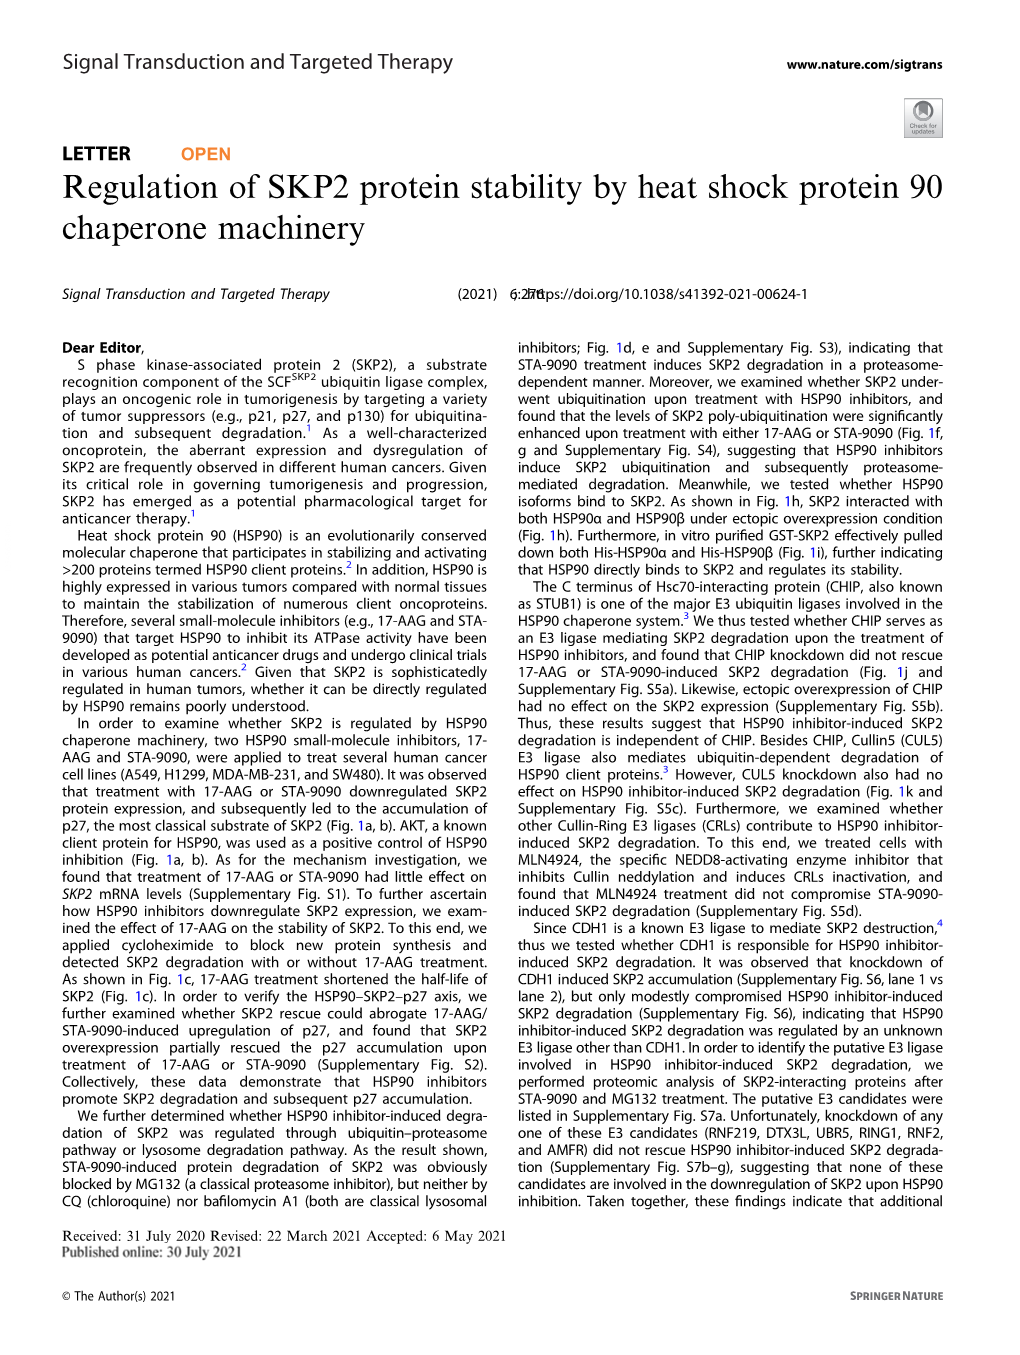 Regulation of SKP2 Protein Stability by Heat Shock Protein 90 Chaperone Machinery